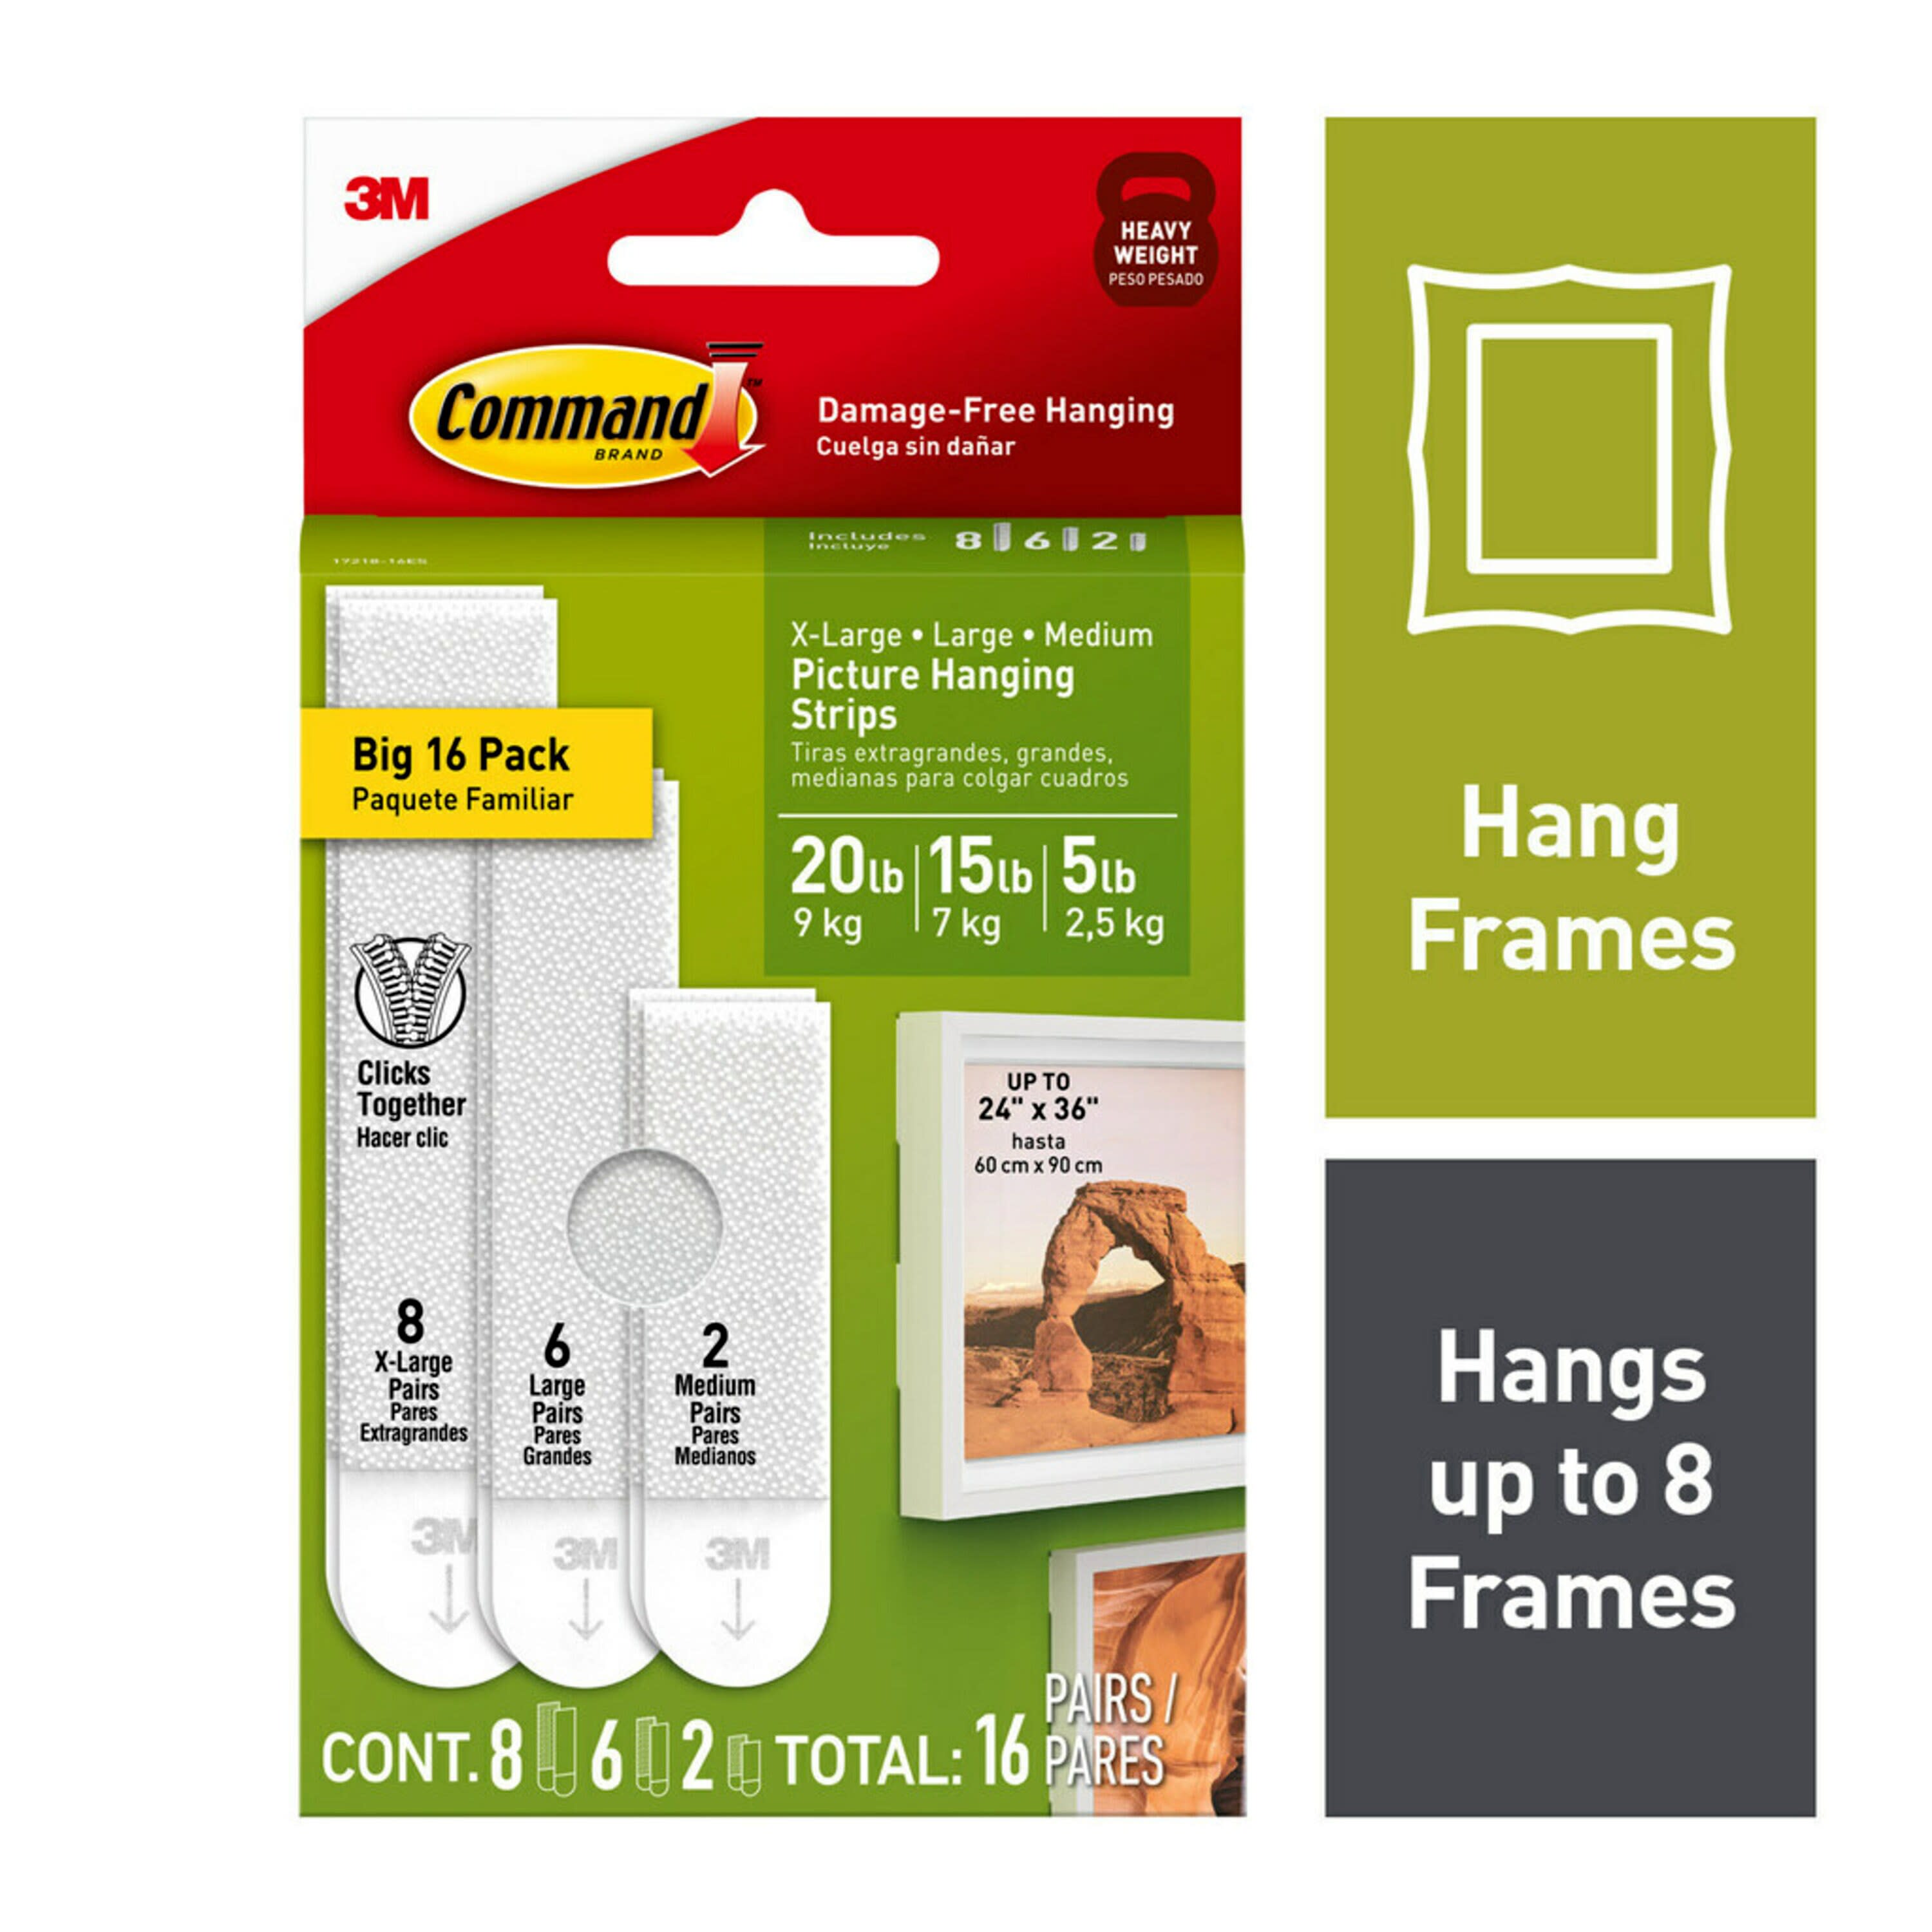 Summerbrite Picture Hanging Strips Heavy Duty, Damage Free Hanging Picture  Hangers, Picture Hanging Kit, Hanging Hooks Without Nails, Wall Strips